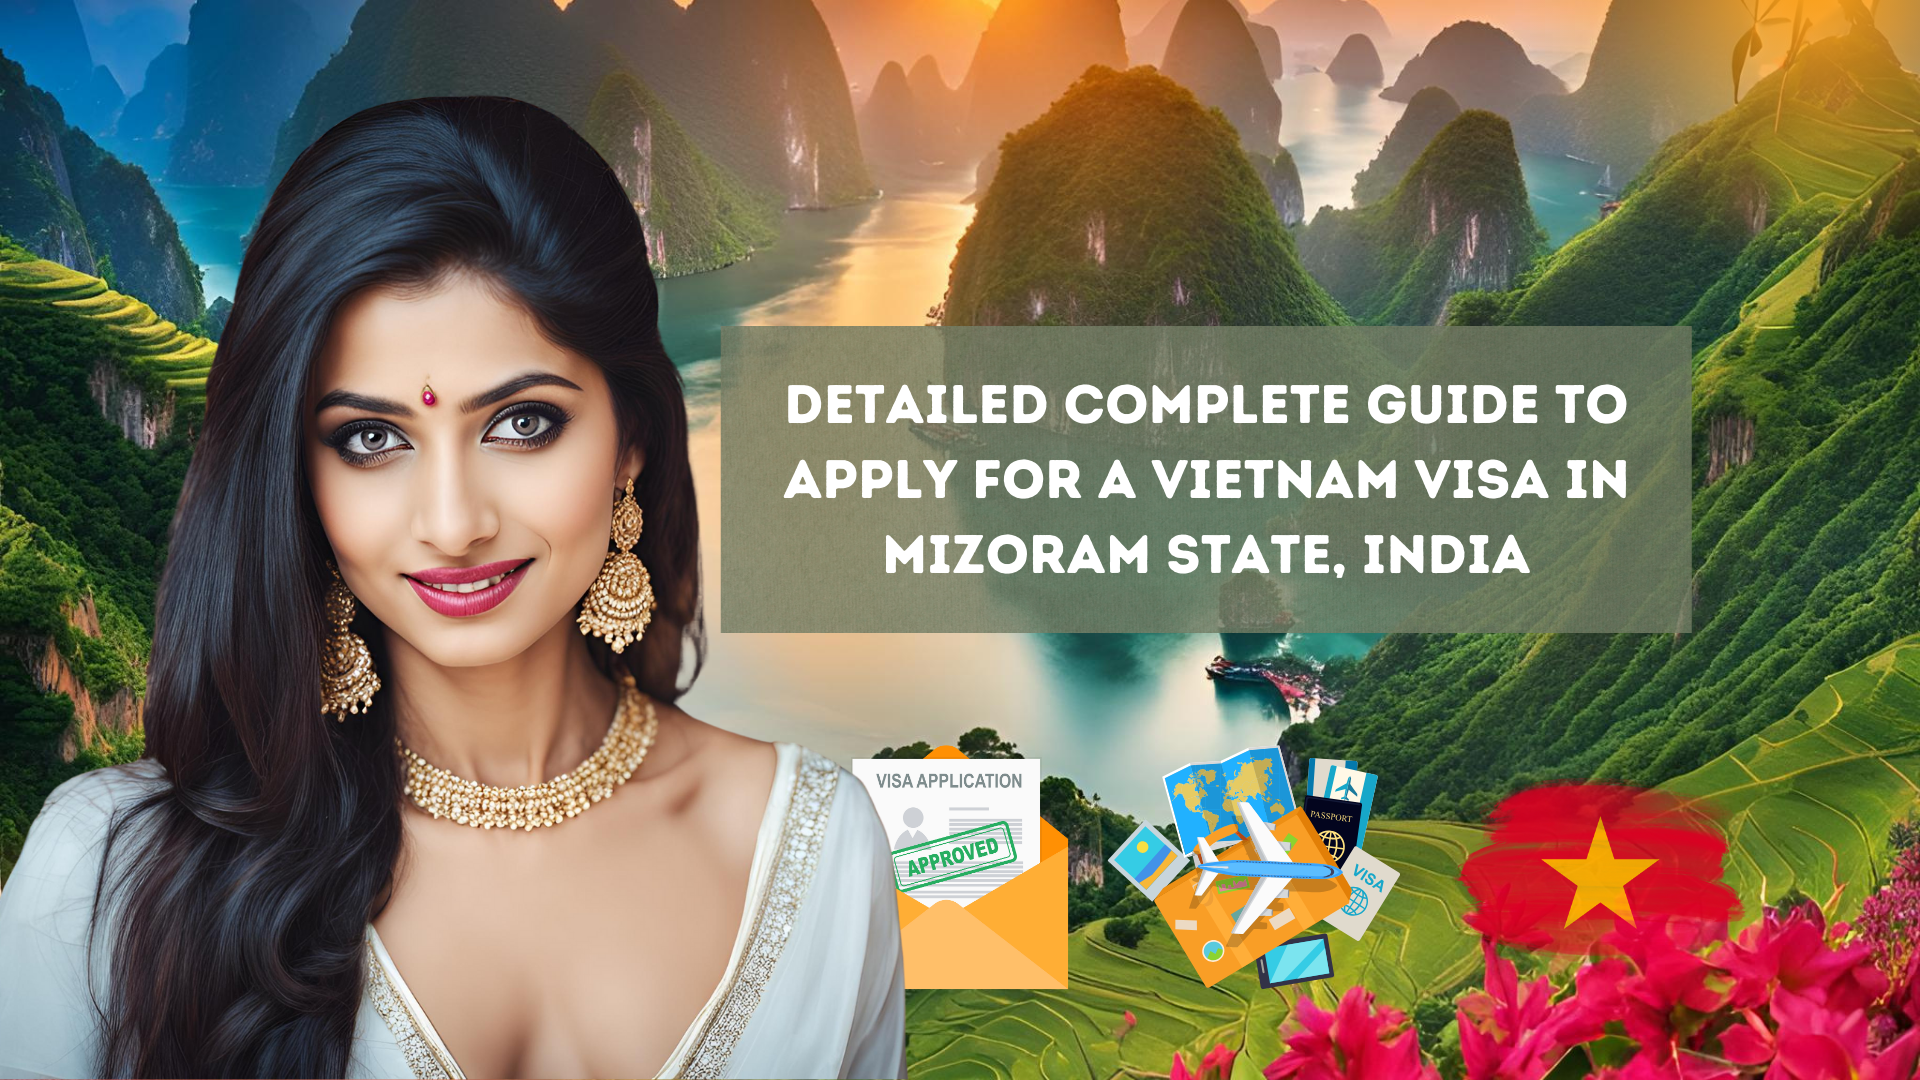 Detailed Complete Guide to Apply for a Vietnam Visa in Mizoram State, India